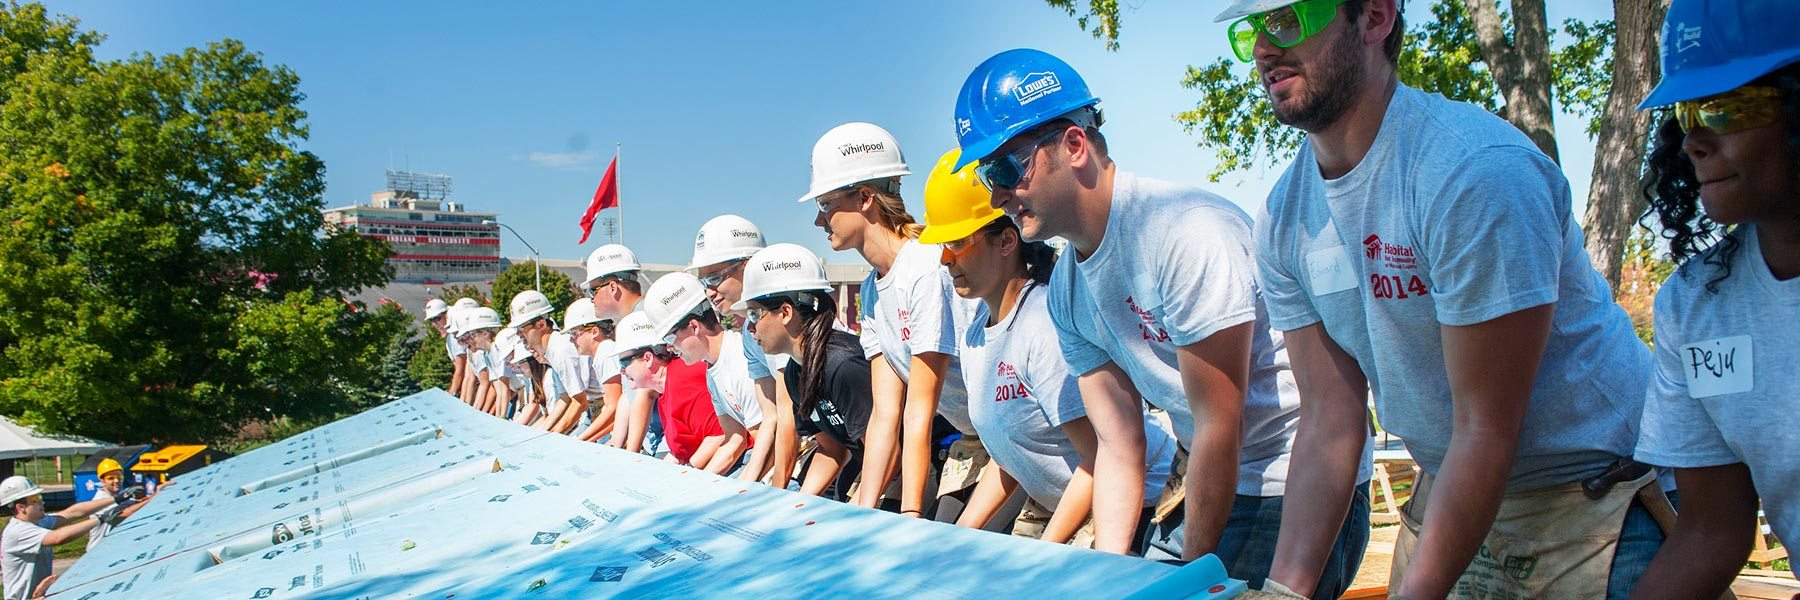 A group of people wearing hard hats work together to raise a blue wall 